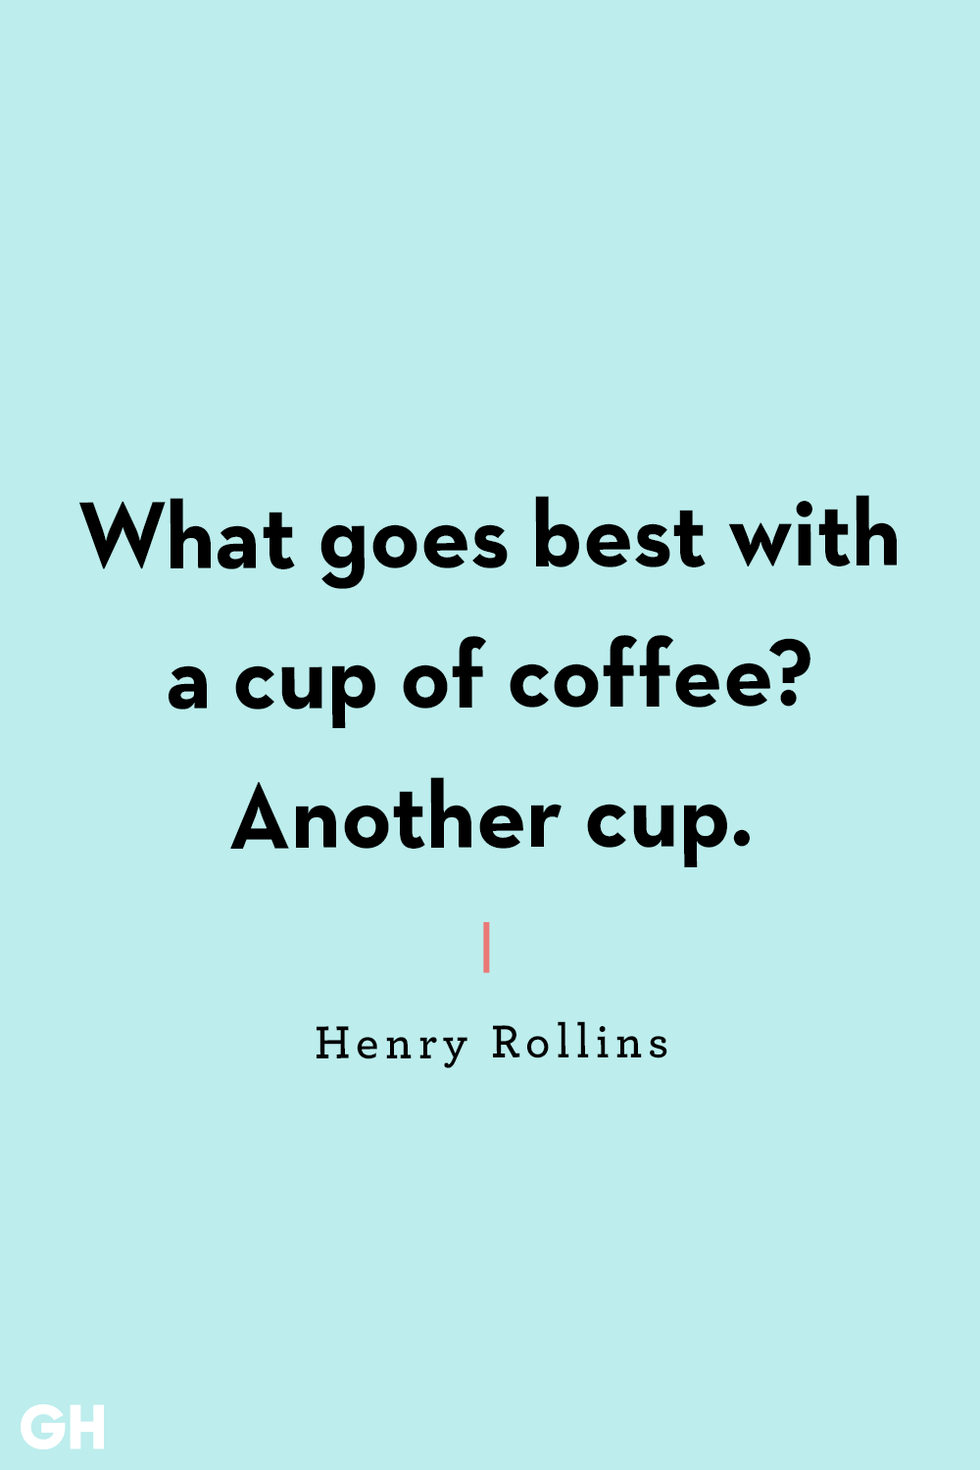 52 Best Funny Coffee Quotes And Sayings For Any Day Of The Week